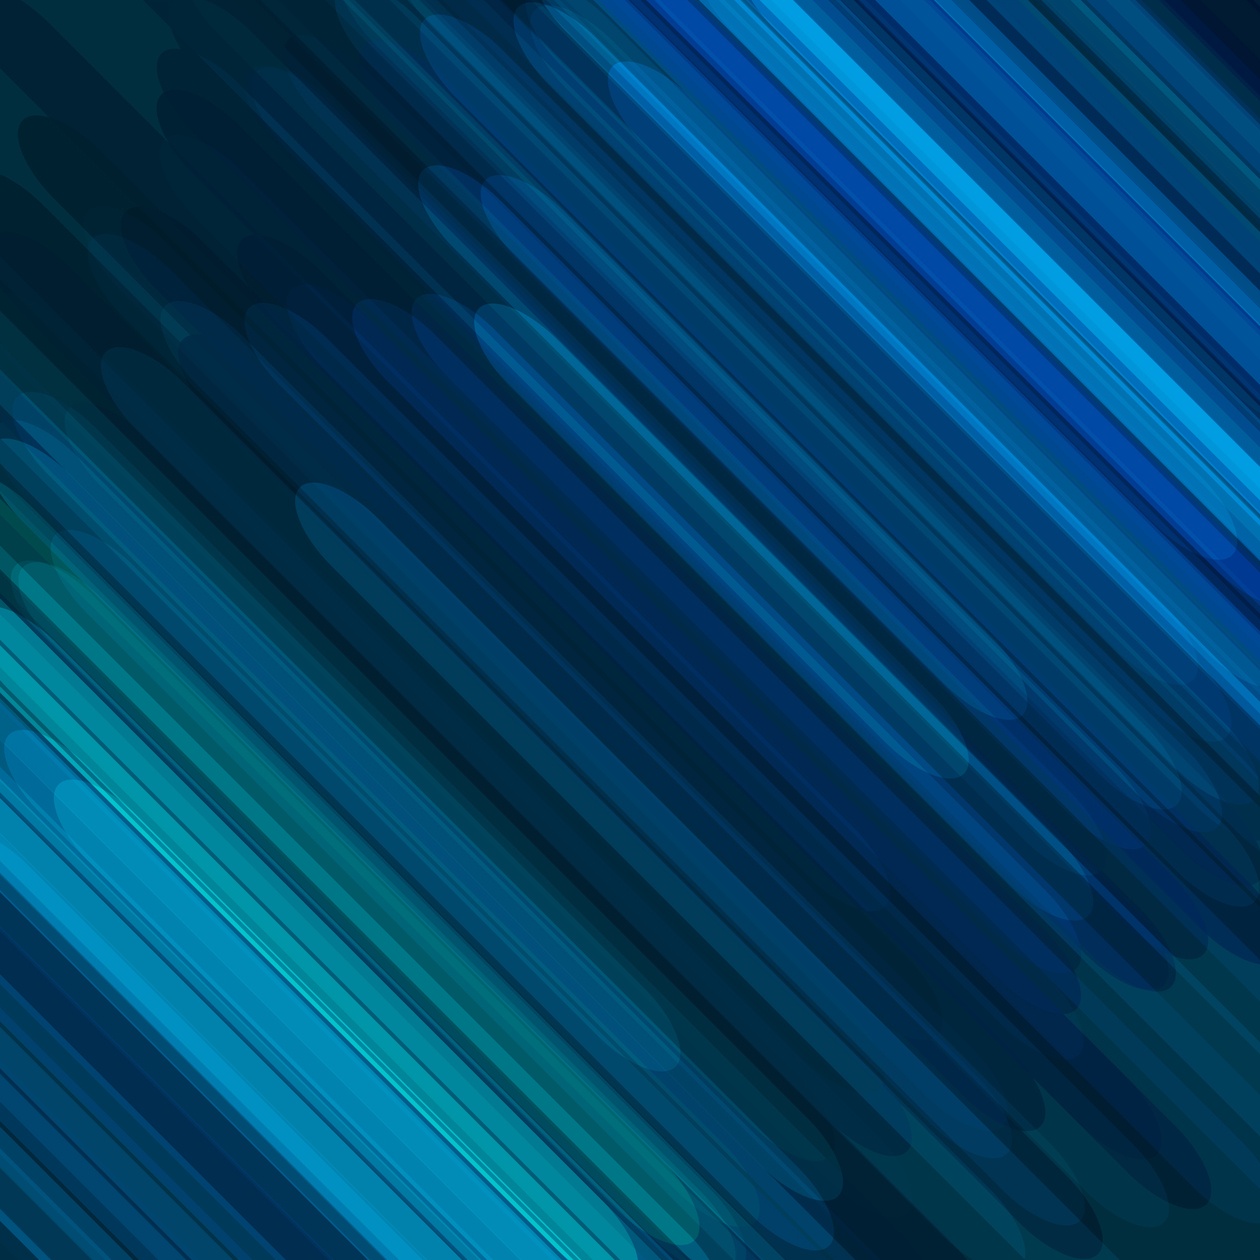 abstract blue ray pattern background Photoshop brush